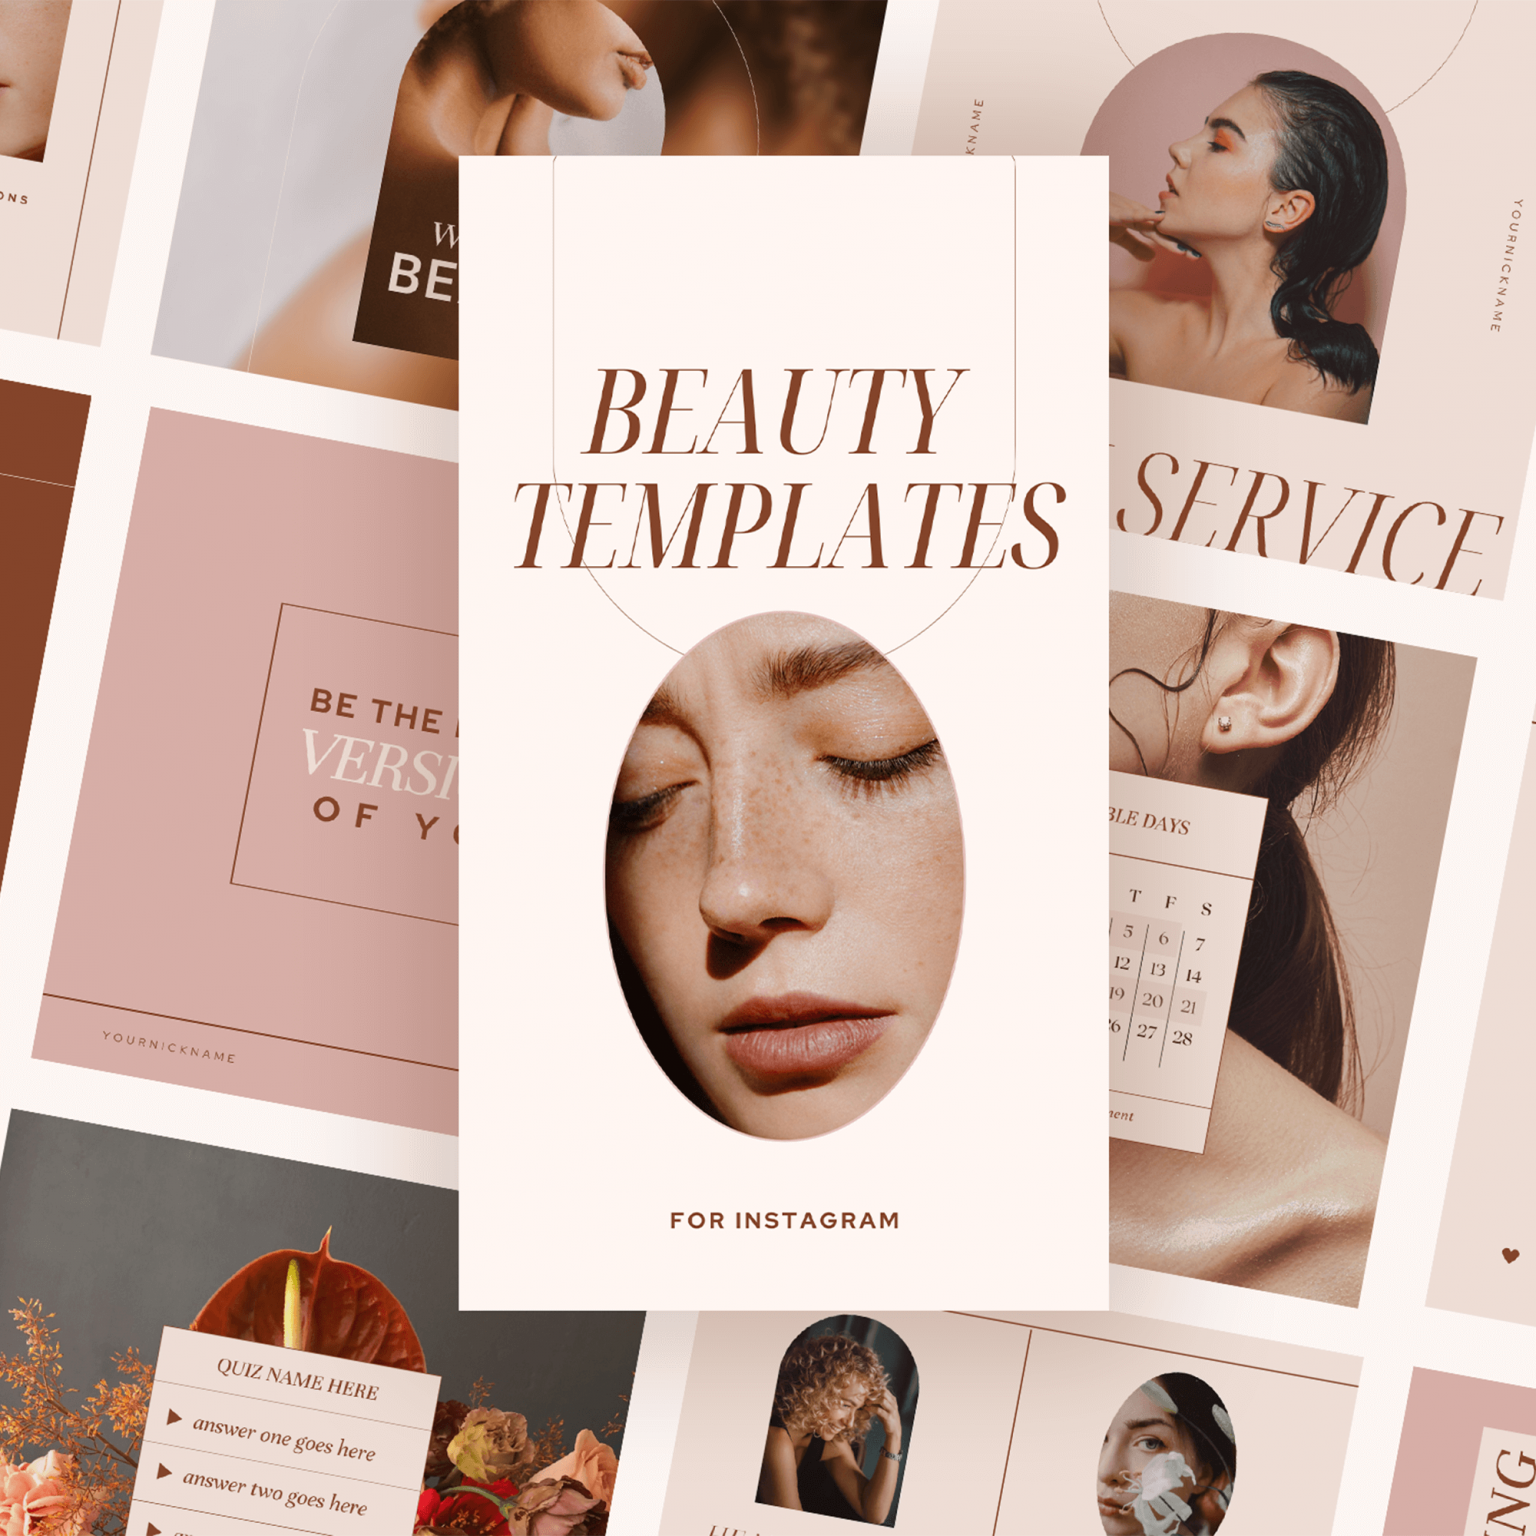 Beauty-Instagram-Post-Templates-Canva-Makeup-Business-social-media-Feed-layout-coach-spa-feminine-Pink-eyebrow-eyelashes-blogger-quote-1536x1536 (1).png